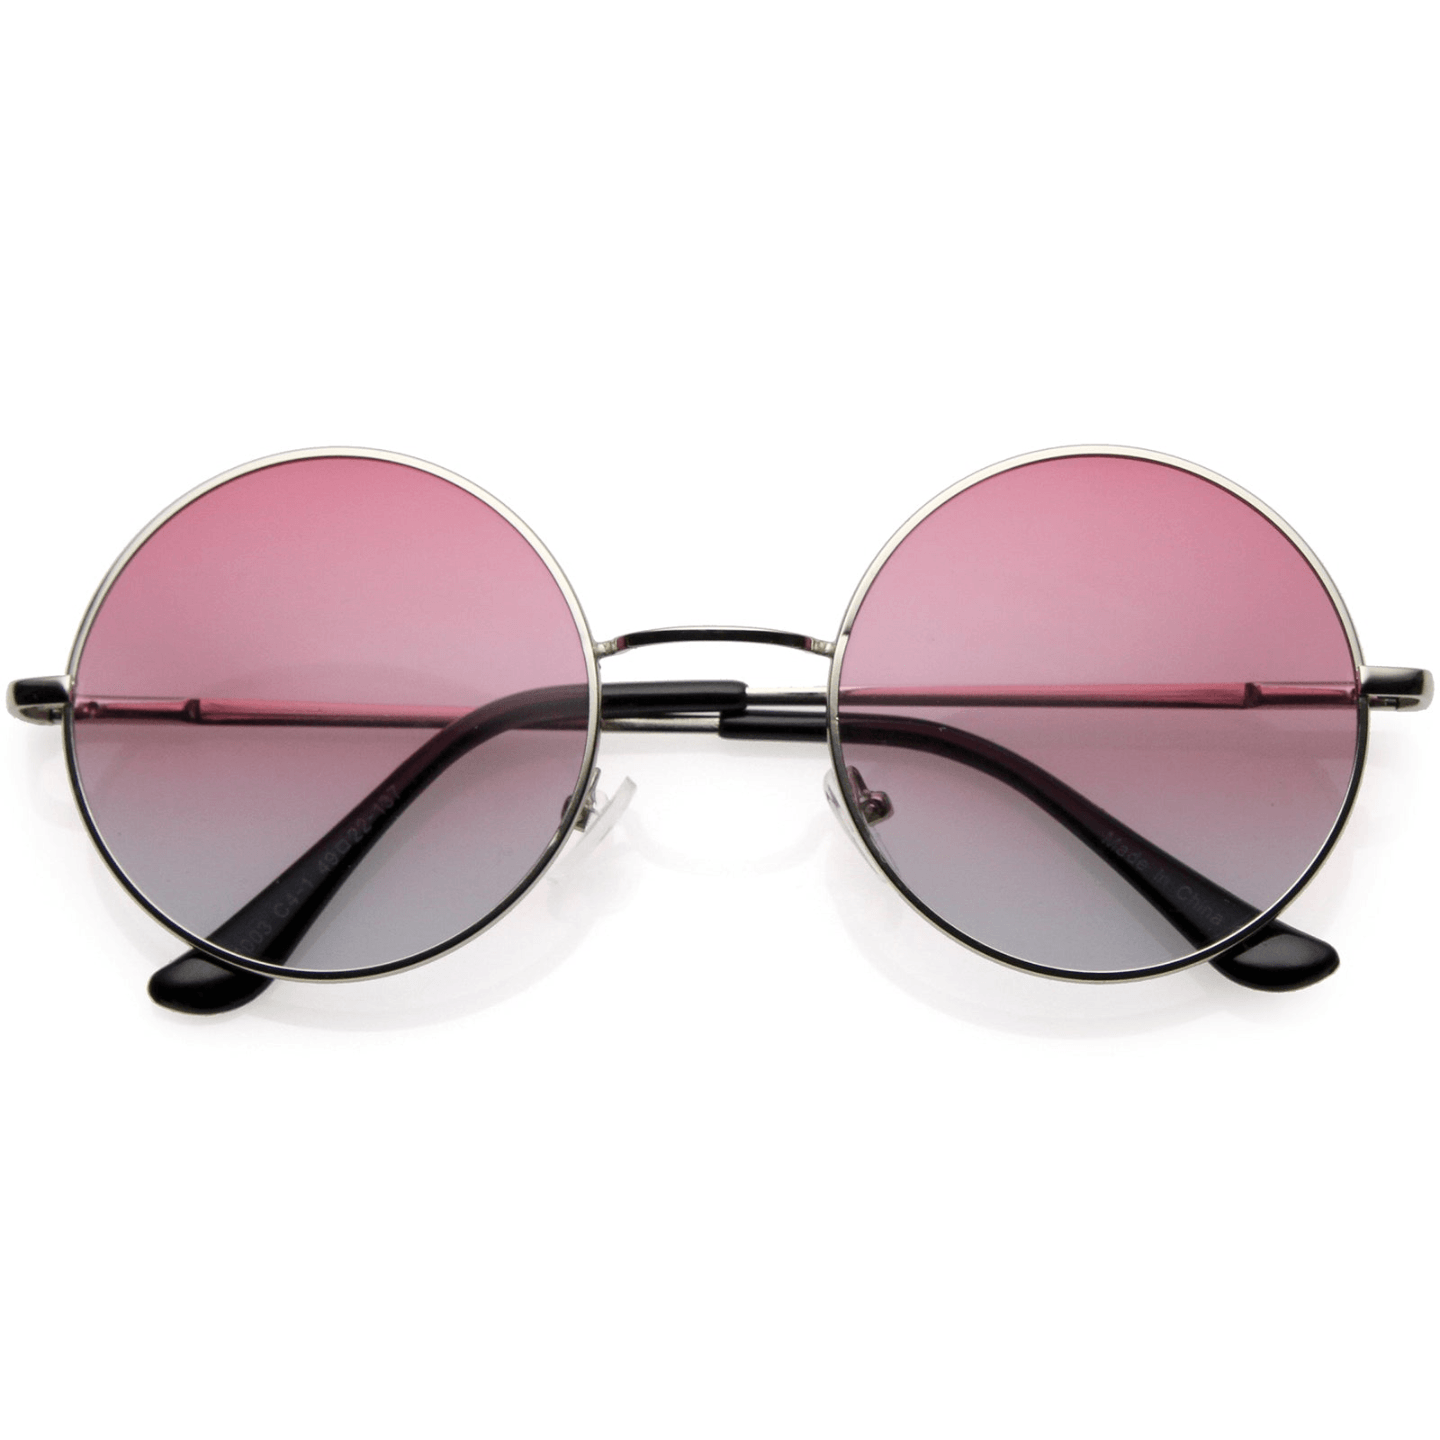 SMALL RETRO LENNON STYLE PINK COLORED ROUND LENS METAL SUNGLASSES